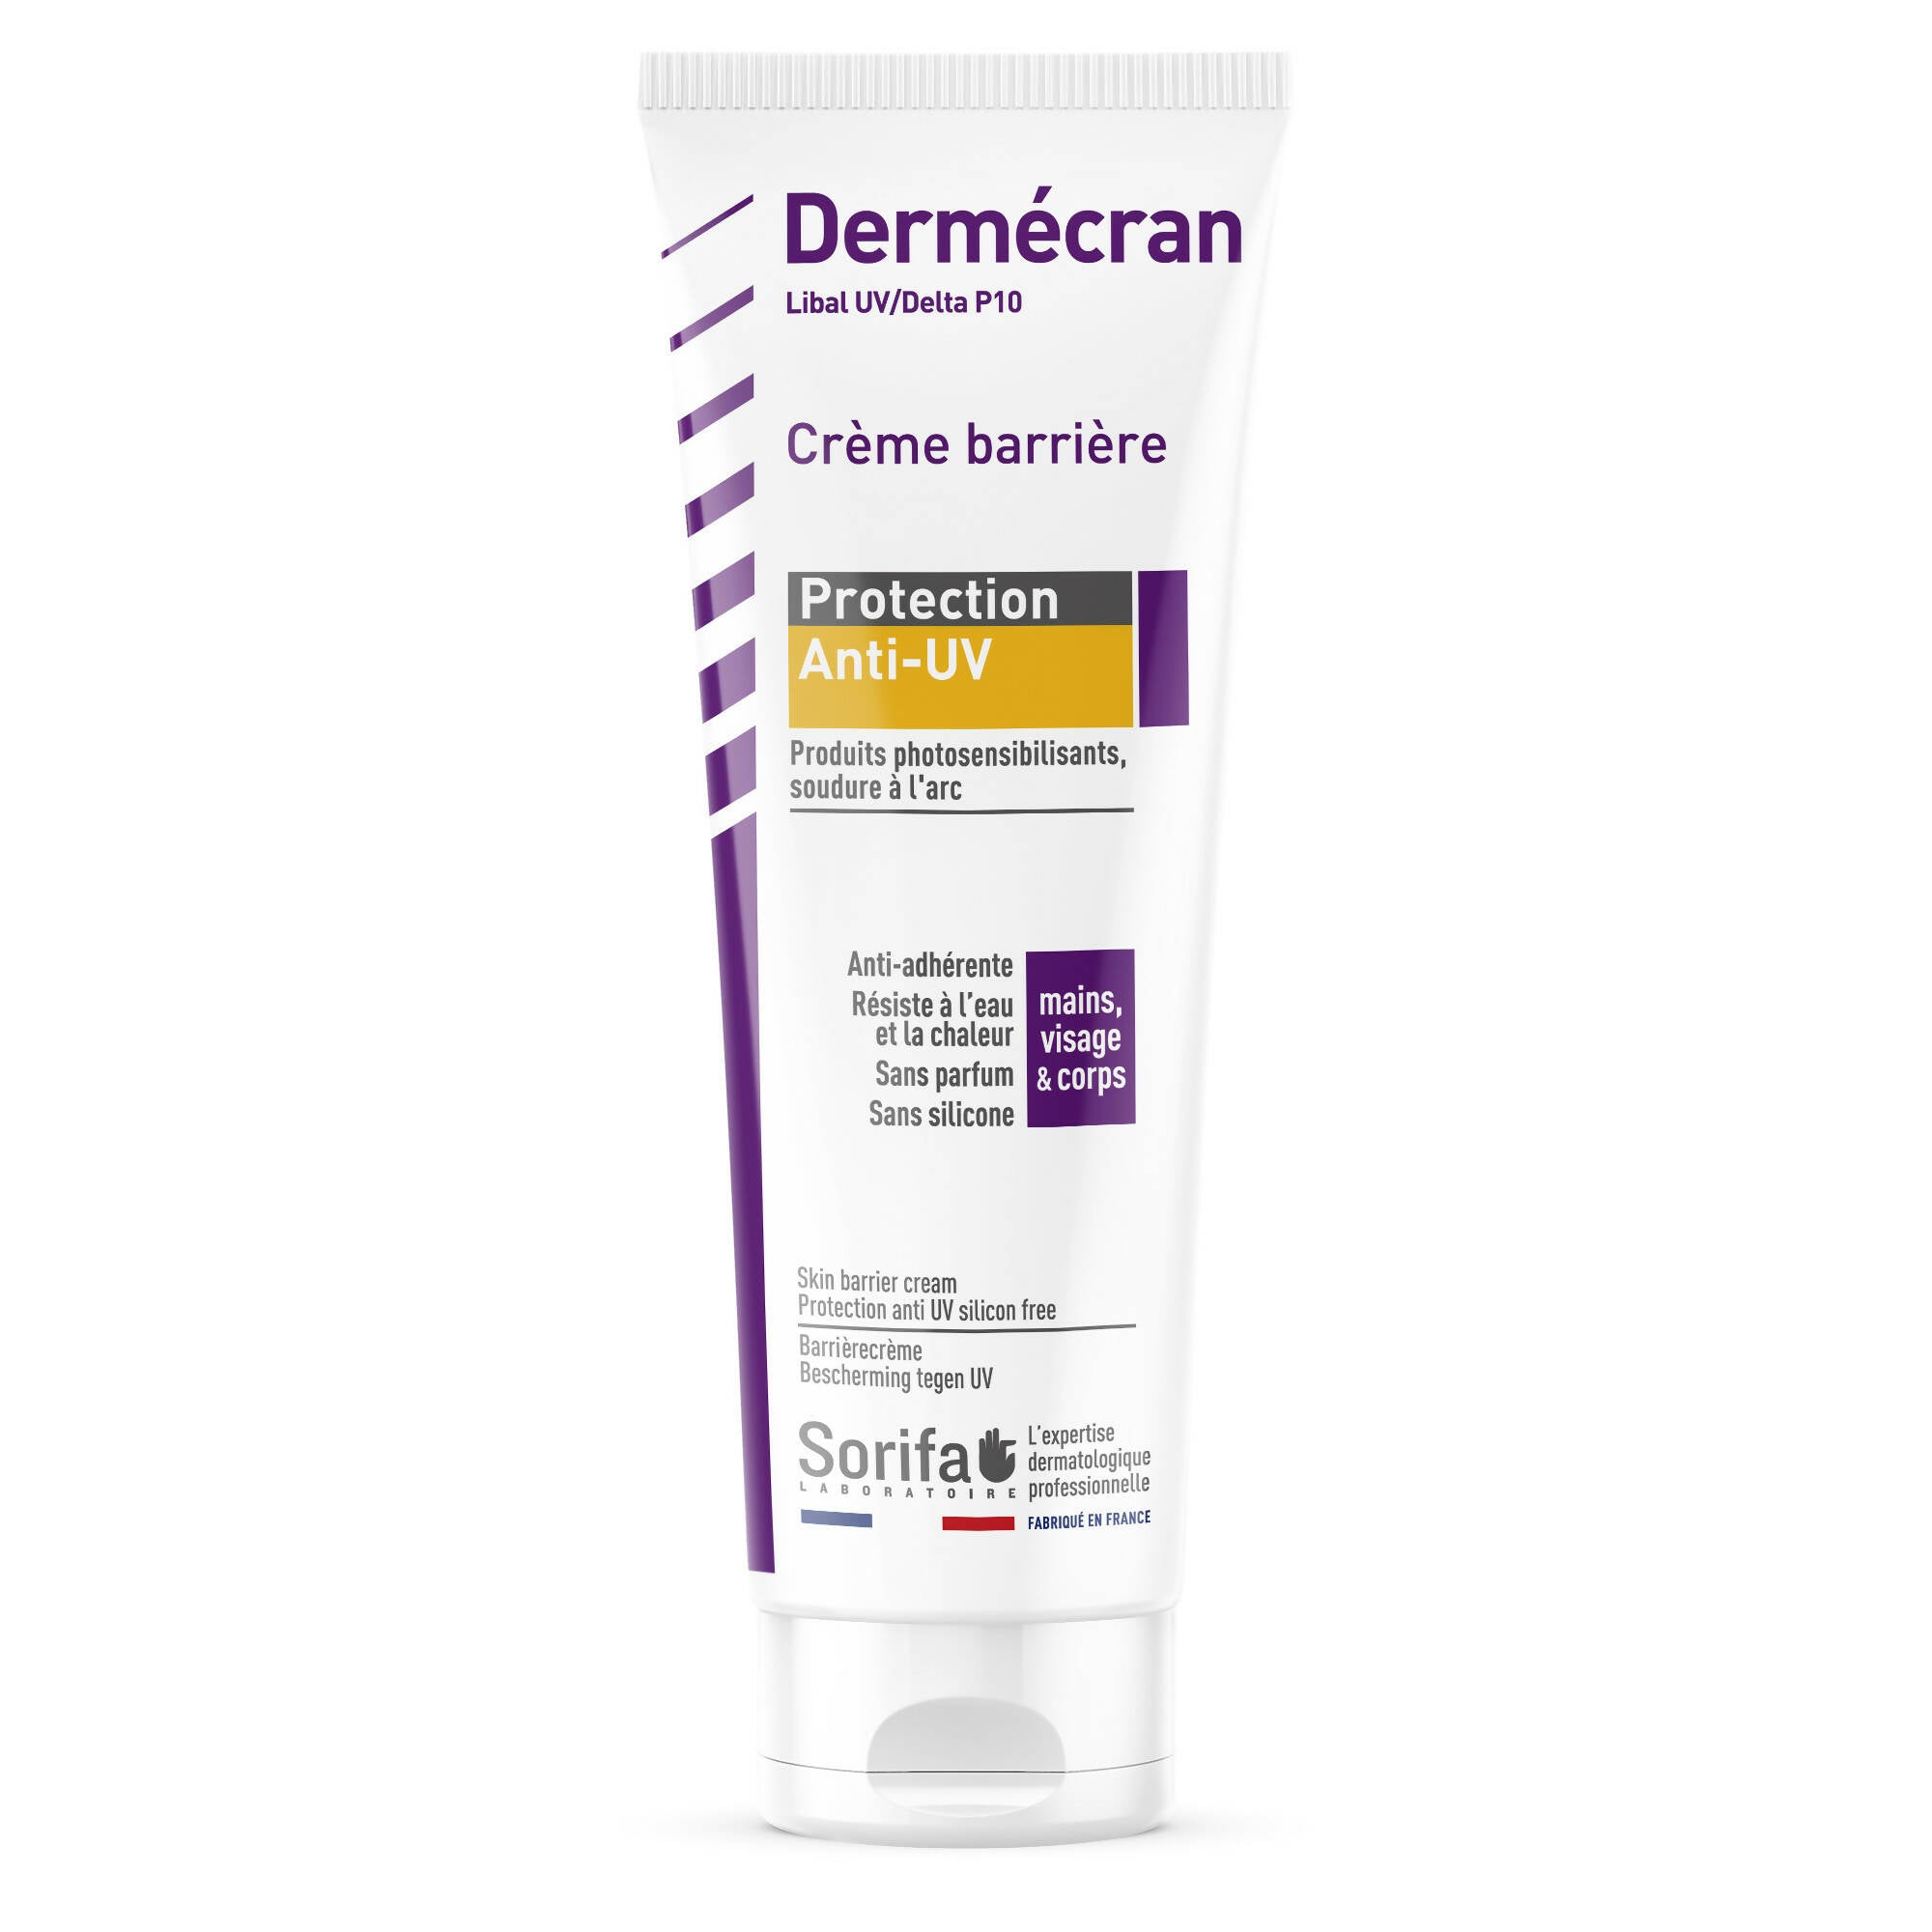 SORIFA - Complete box of 24 - Dermscreen - Barrier cream - ANTI-UV protection / Delta P10 - Soldering - Photo-sensitizing products - Hands, face and body - High tolerance - 125 ml tube. - 0